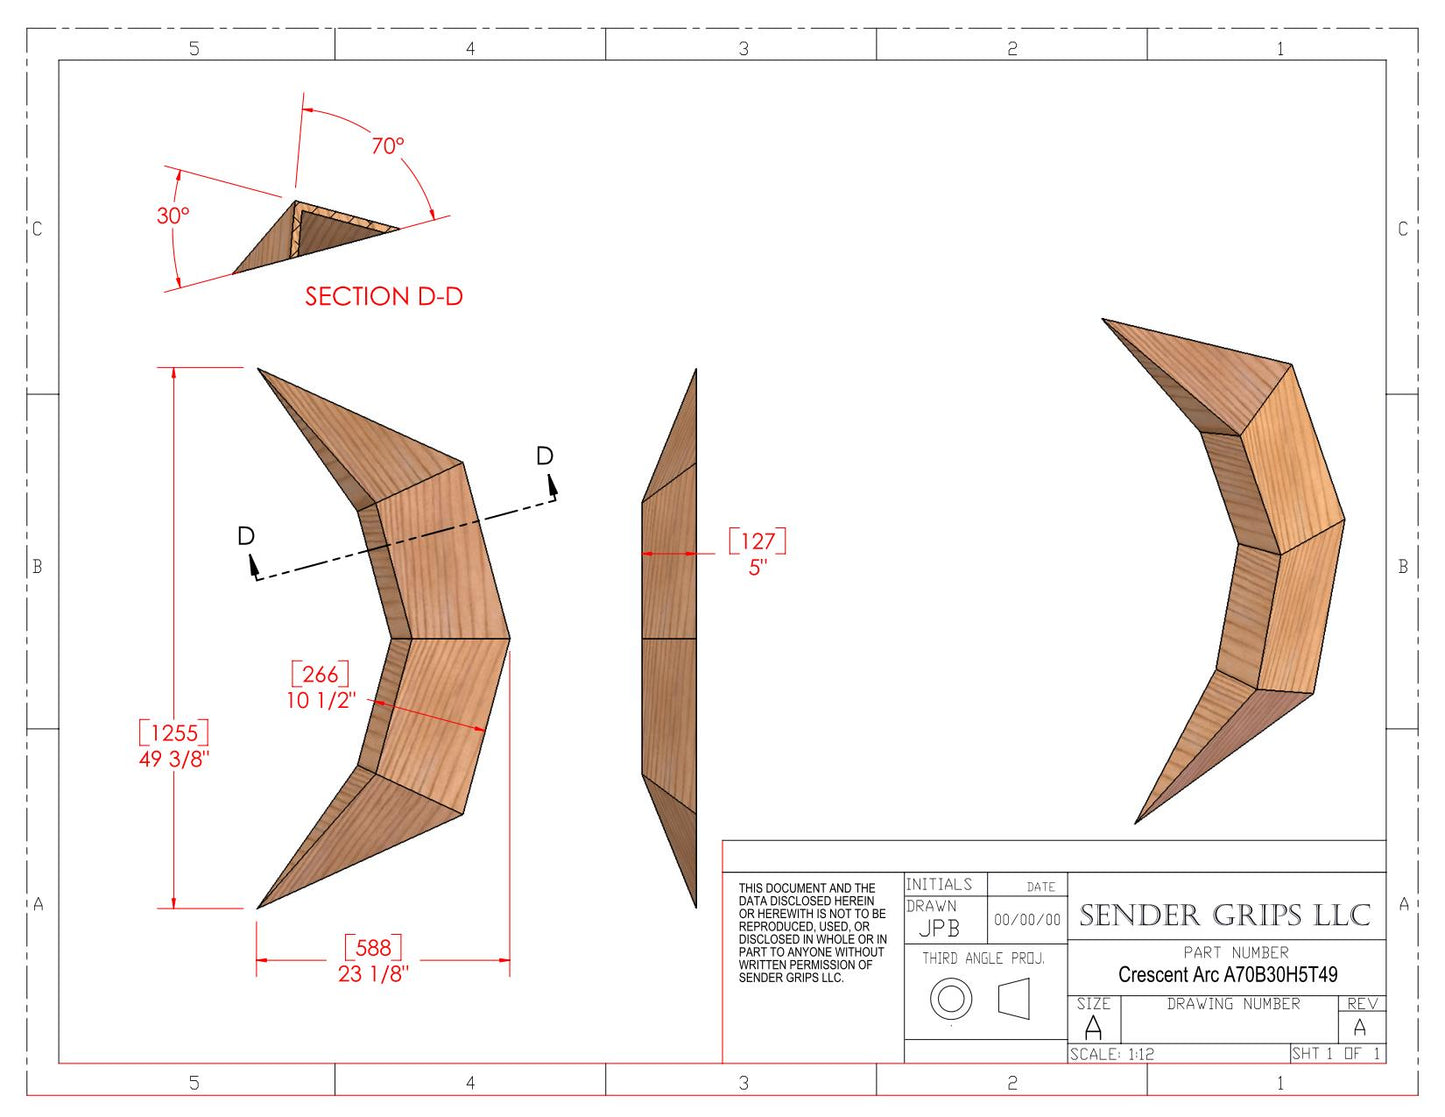 Crescent Arc Steep Inside x Shallow Outside (X-Large)  49" Long (1245mm) x 5"(127mm) Climbing Volume Plans